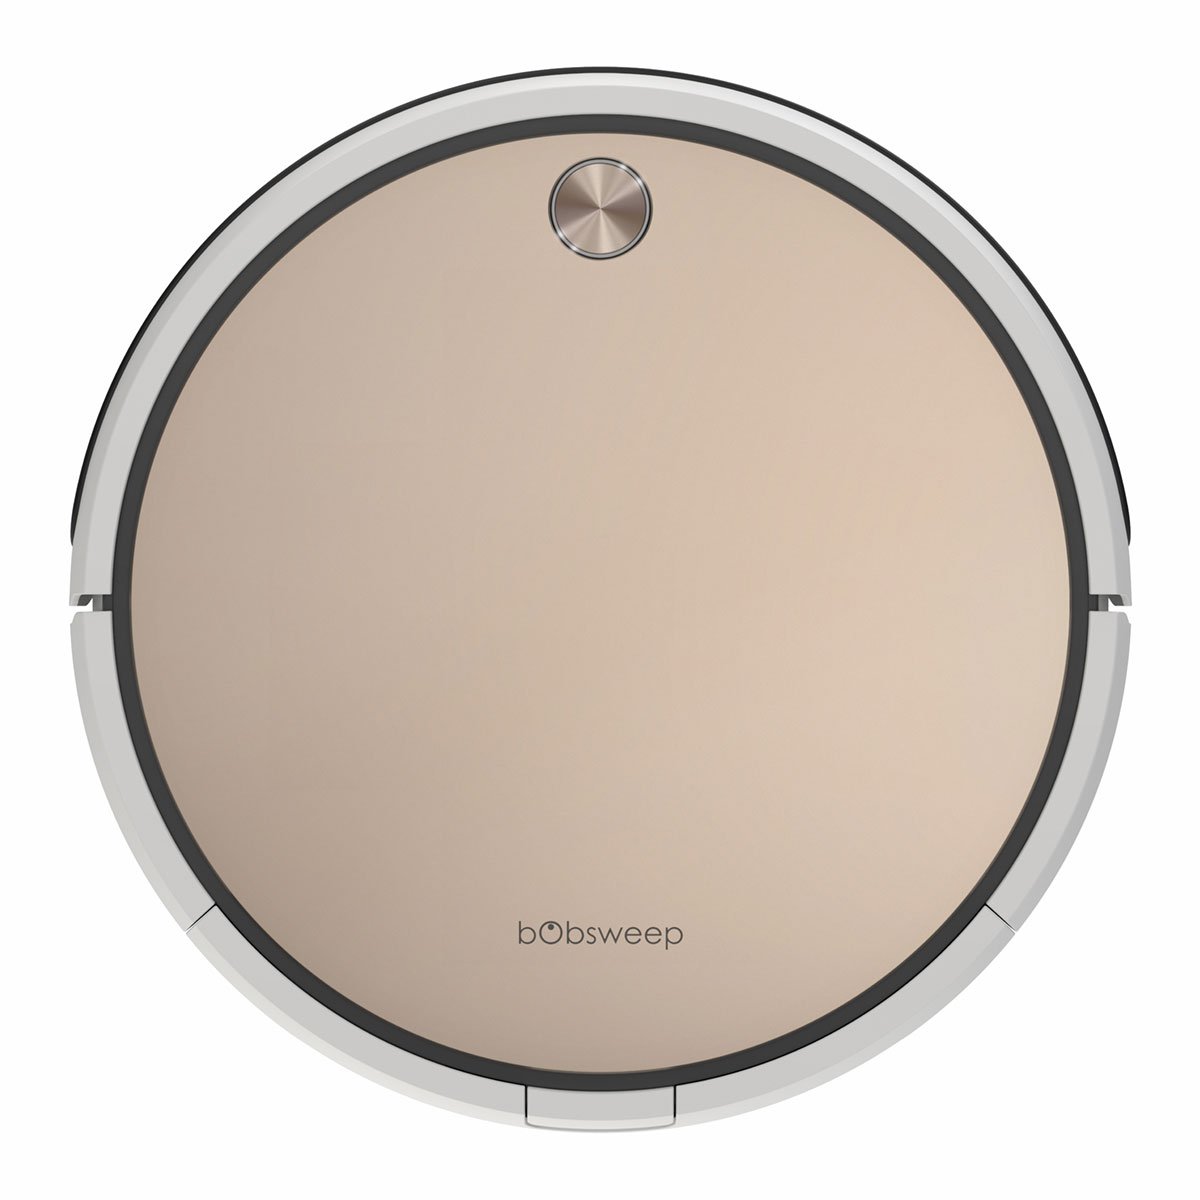 bObsweep Pro Robotic Vacuum Cleaner, Gold - image 1 of 6